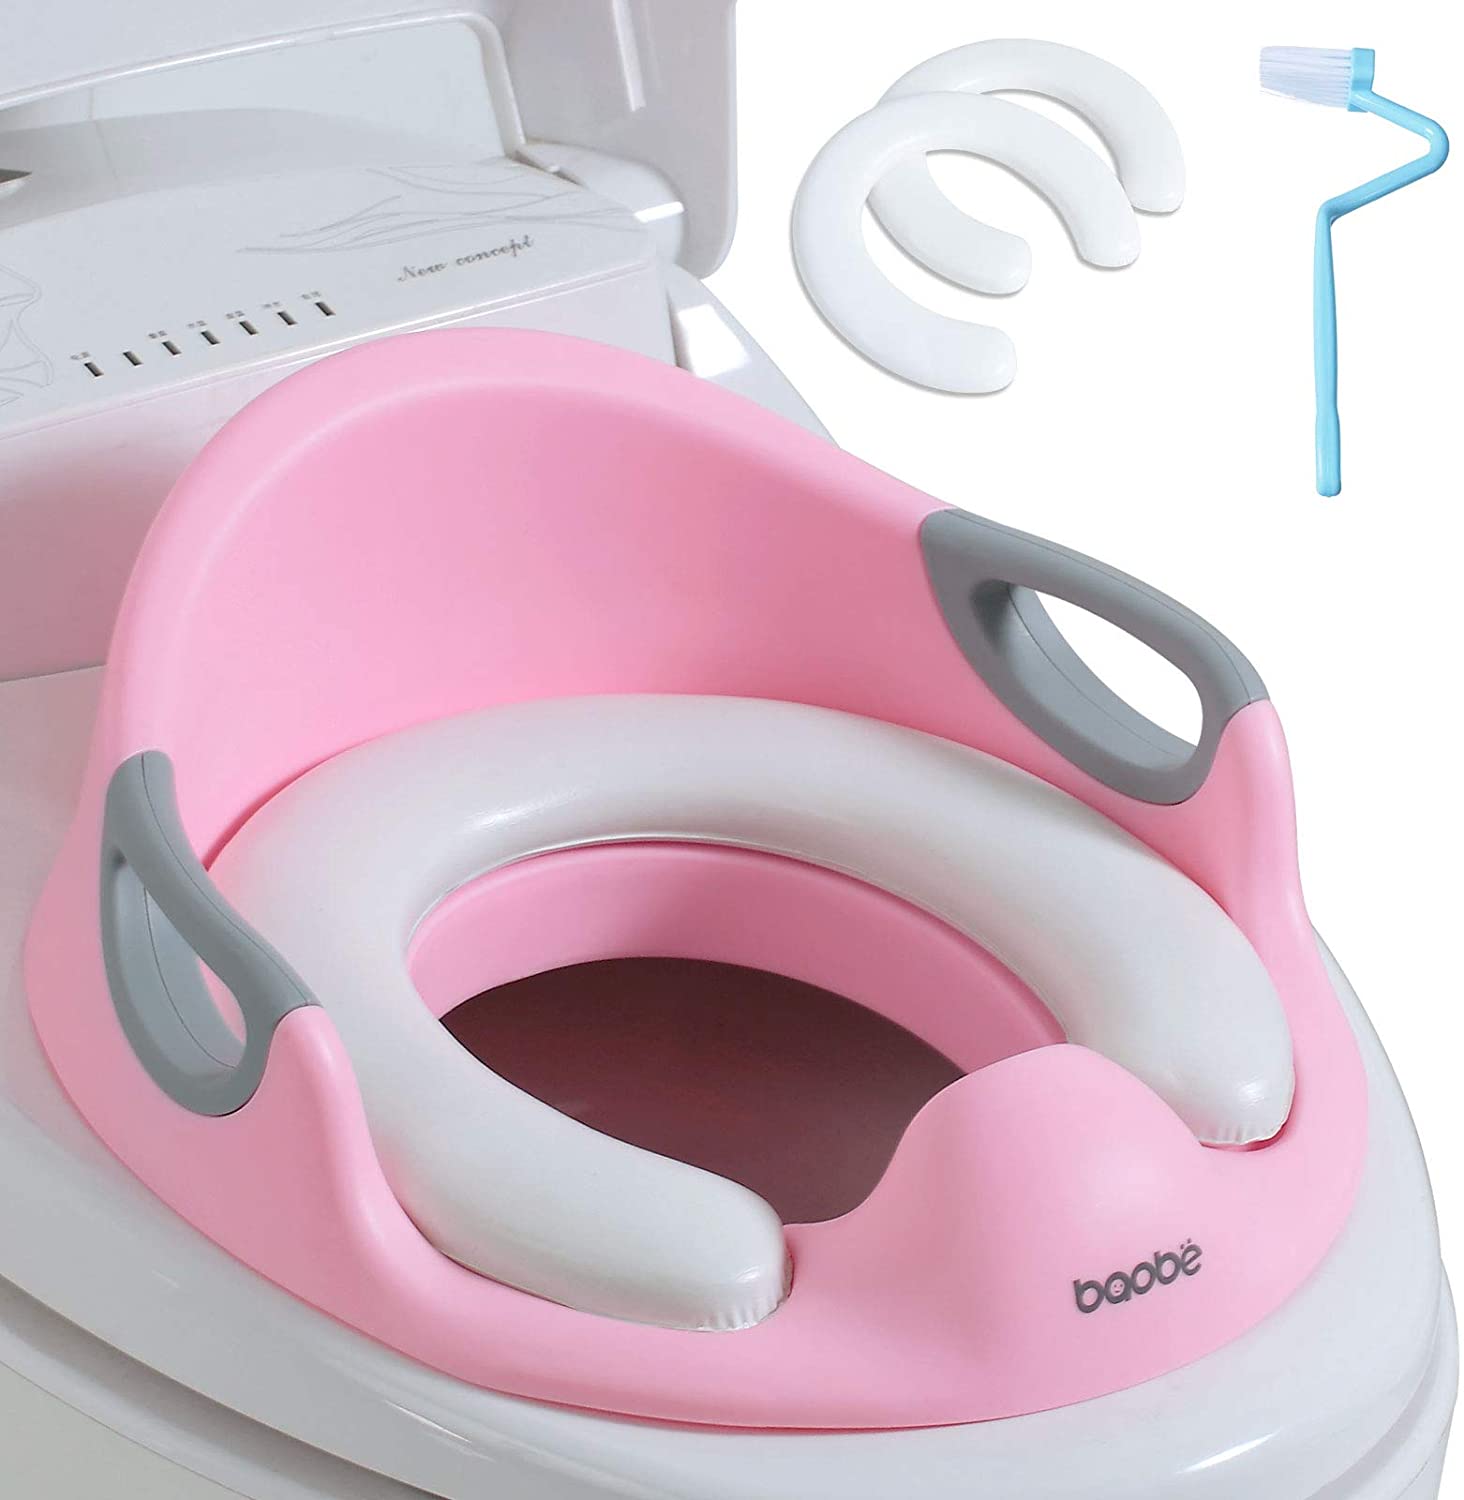 Low MOQ for Baby Care Company - Potty Training Seat for Kids Toddlers, Toilet Seat for Baby with Cushion Handle and Backrest, Toilet Trainer for Round and Oval Toilets (Pink) – Ealing